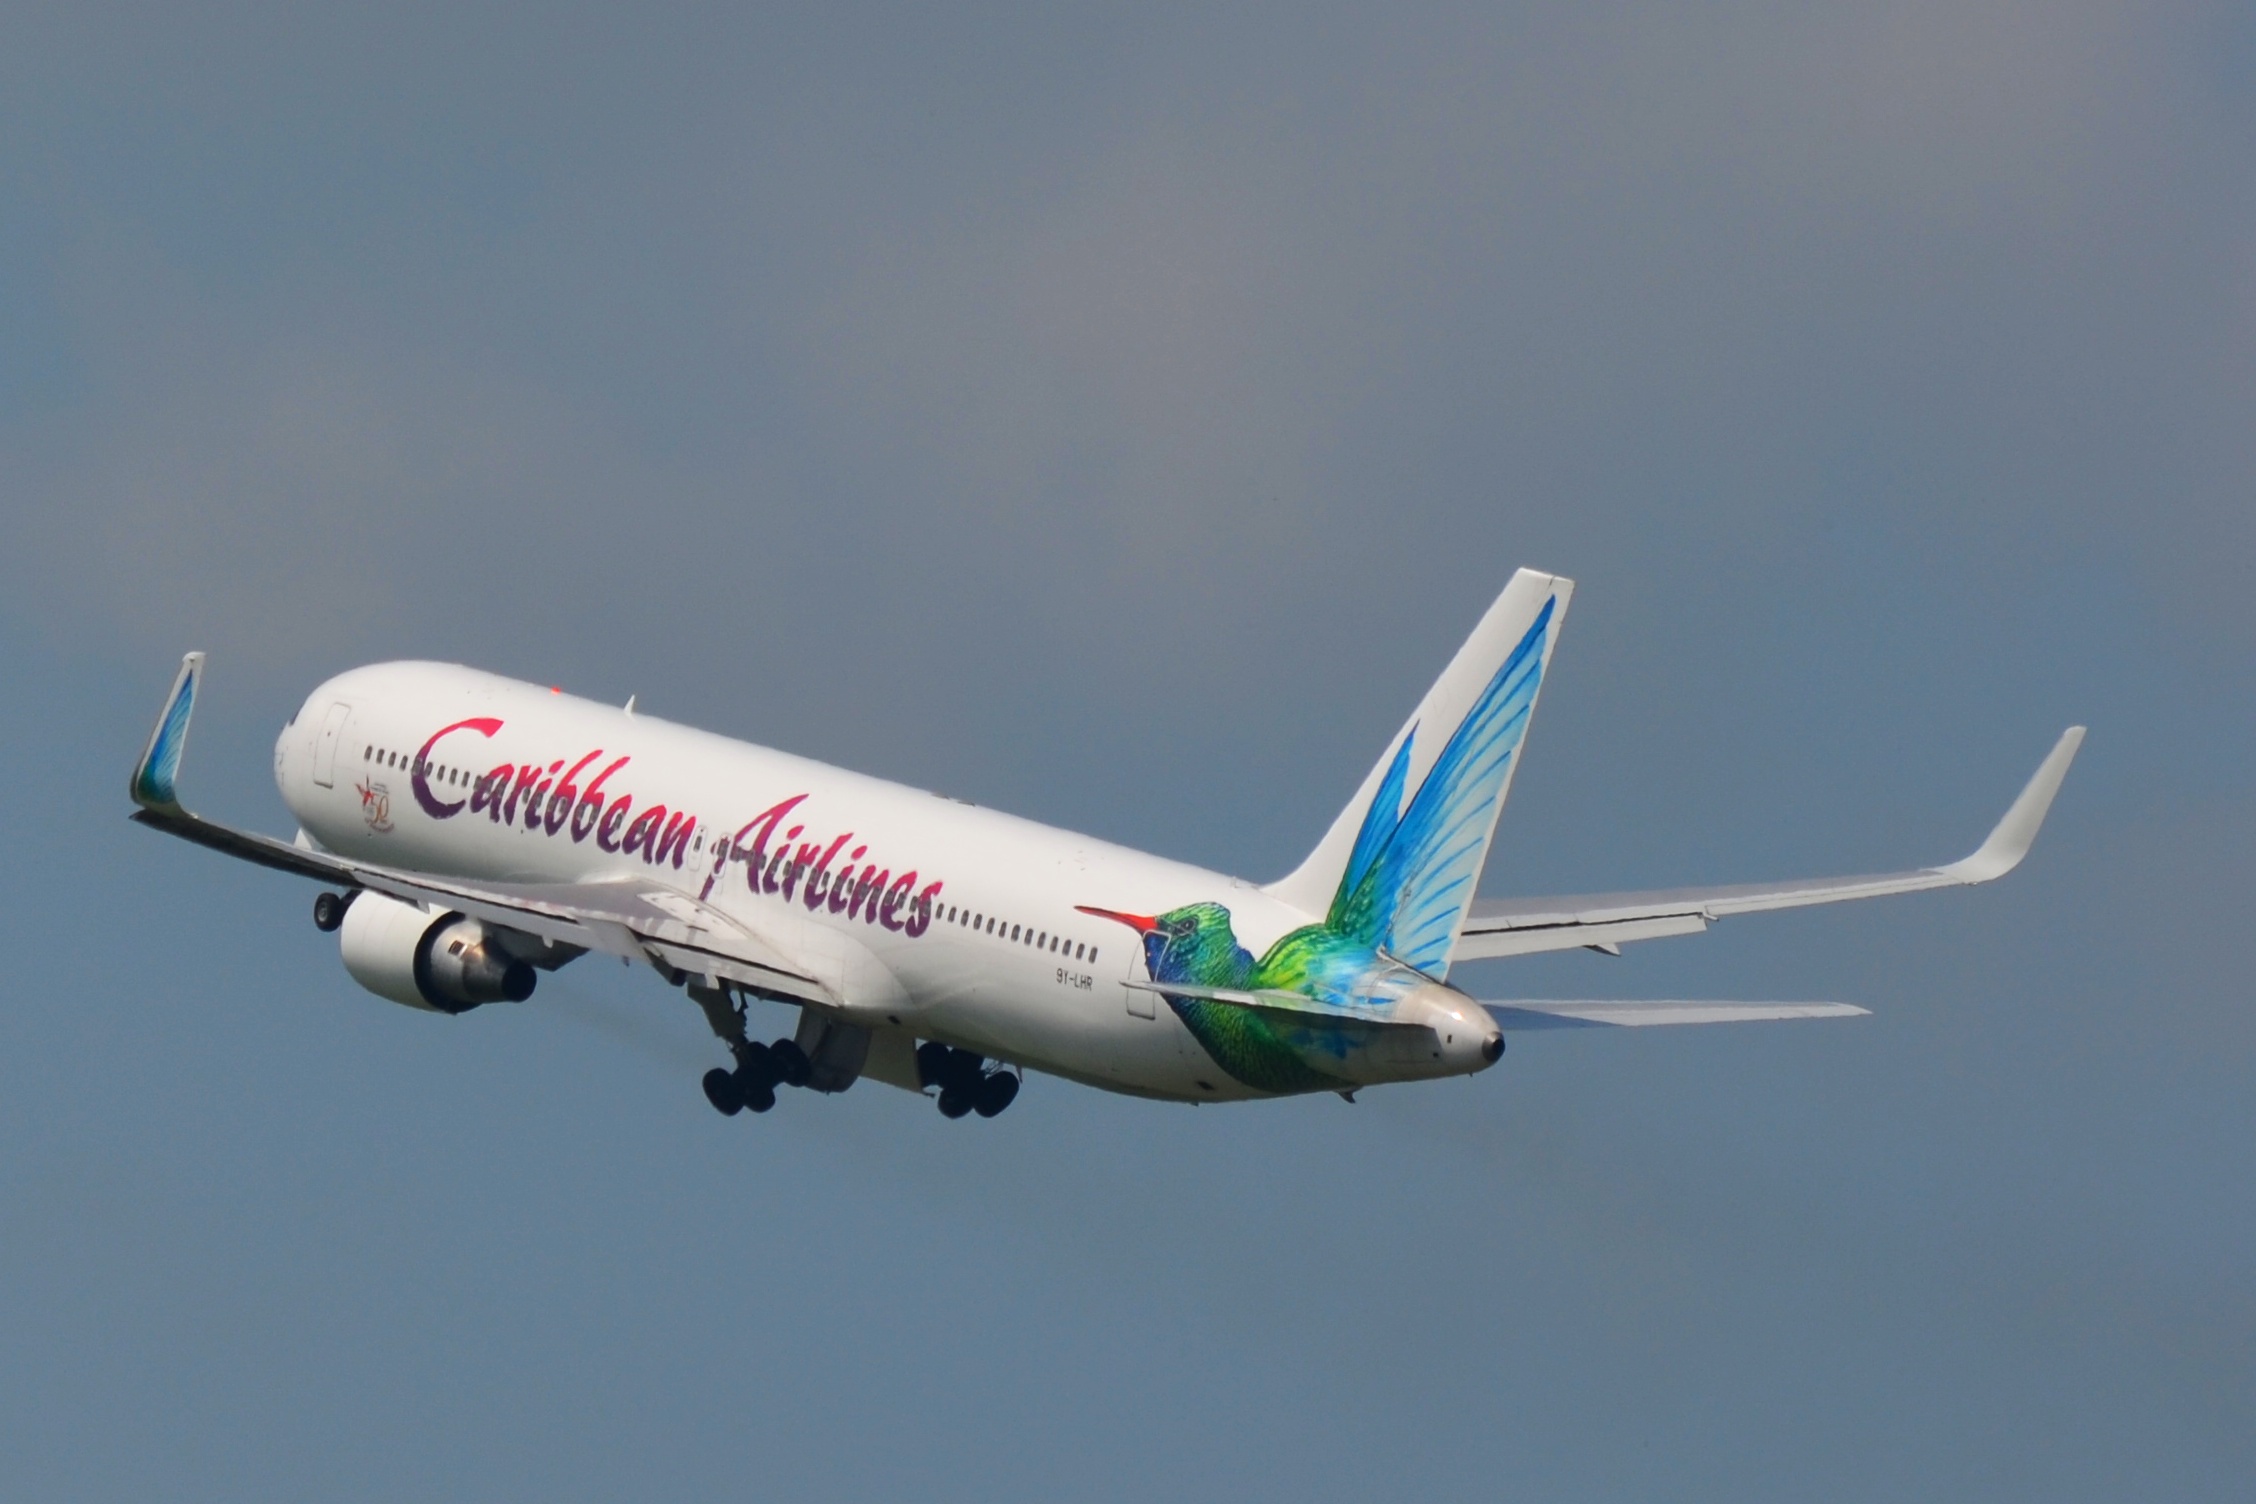 caribbean-airlines-cargo-increases-capacity-for-christmas